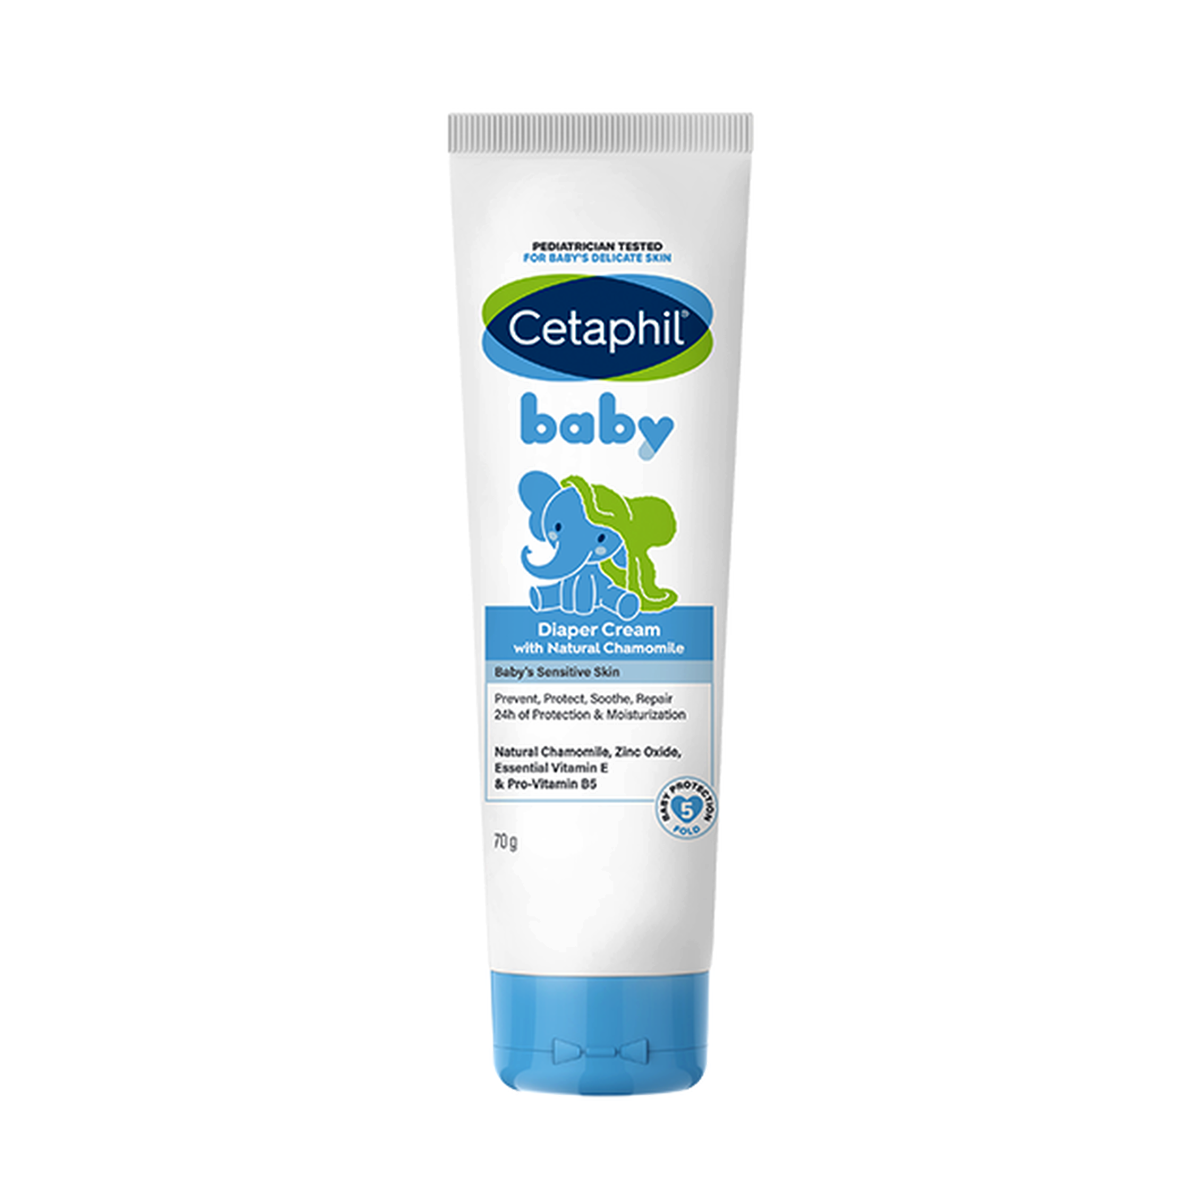 First product image of Cetaphil Baby Diaper Cream 70g